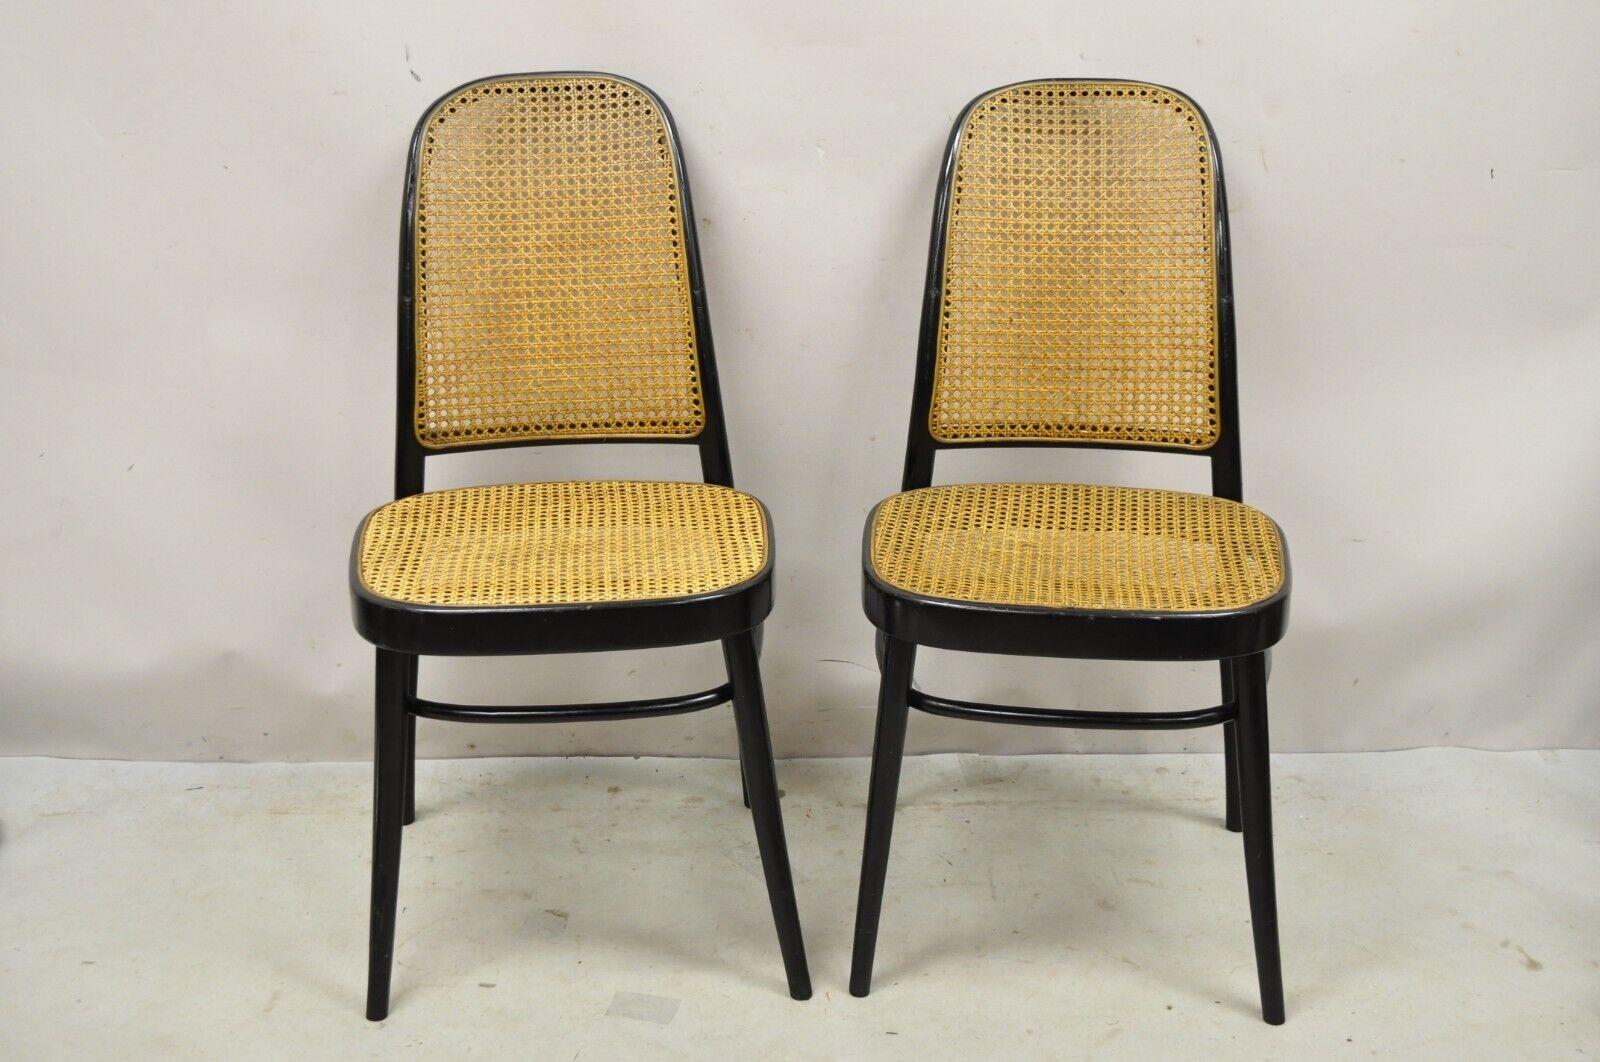 Vintage Ligna Bentwood Black Ebonized Cane Bistro Side Chairs - a Pair. The item features the original label, cane seat/back, tapered legs, very nice vintage pair, great style and form. Circa Mid 20th Century. Measurements: 36